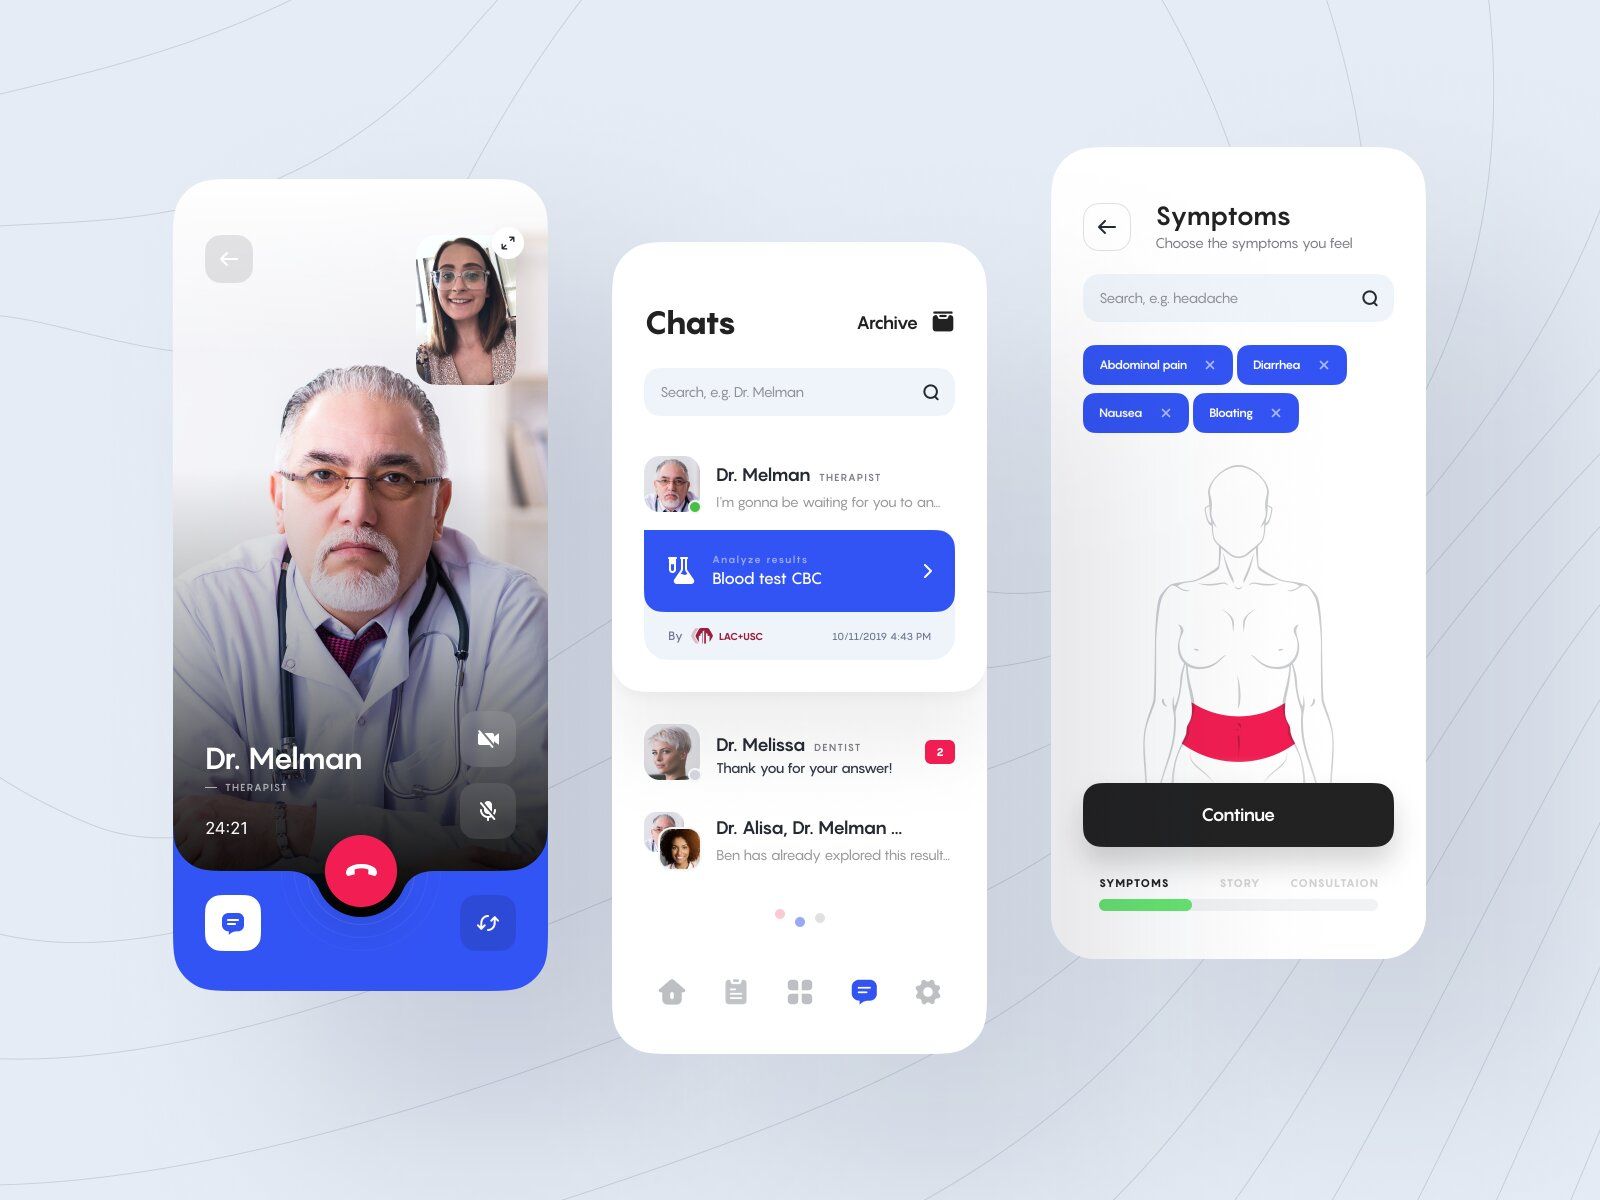 Video conferencing is is an important part of any telemedicine software development (*image by [Alexander Plyuto 🎲](https://dribbble.com/alexplyuto){ rel="nofollow" .default-md}*)